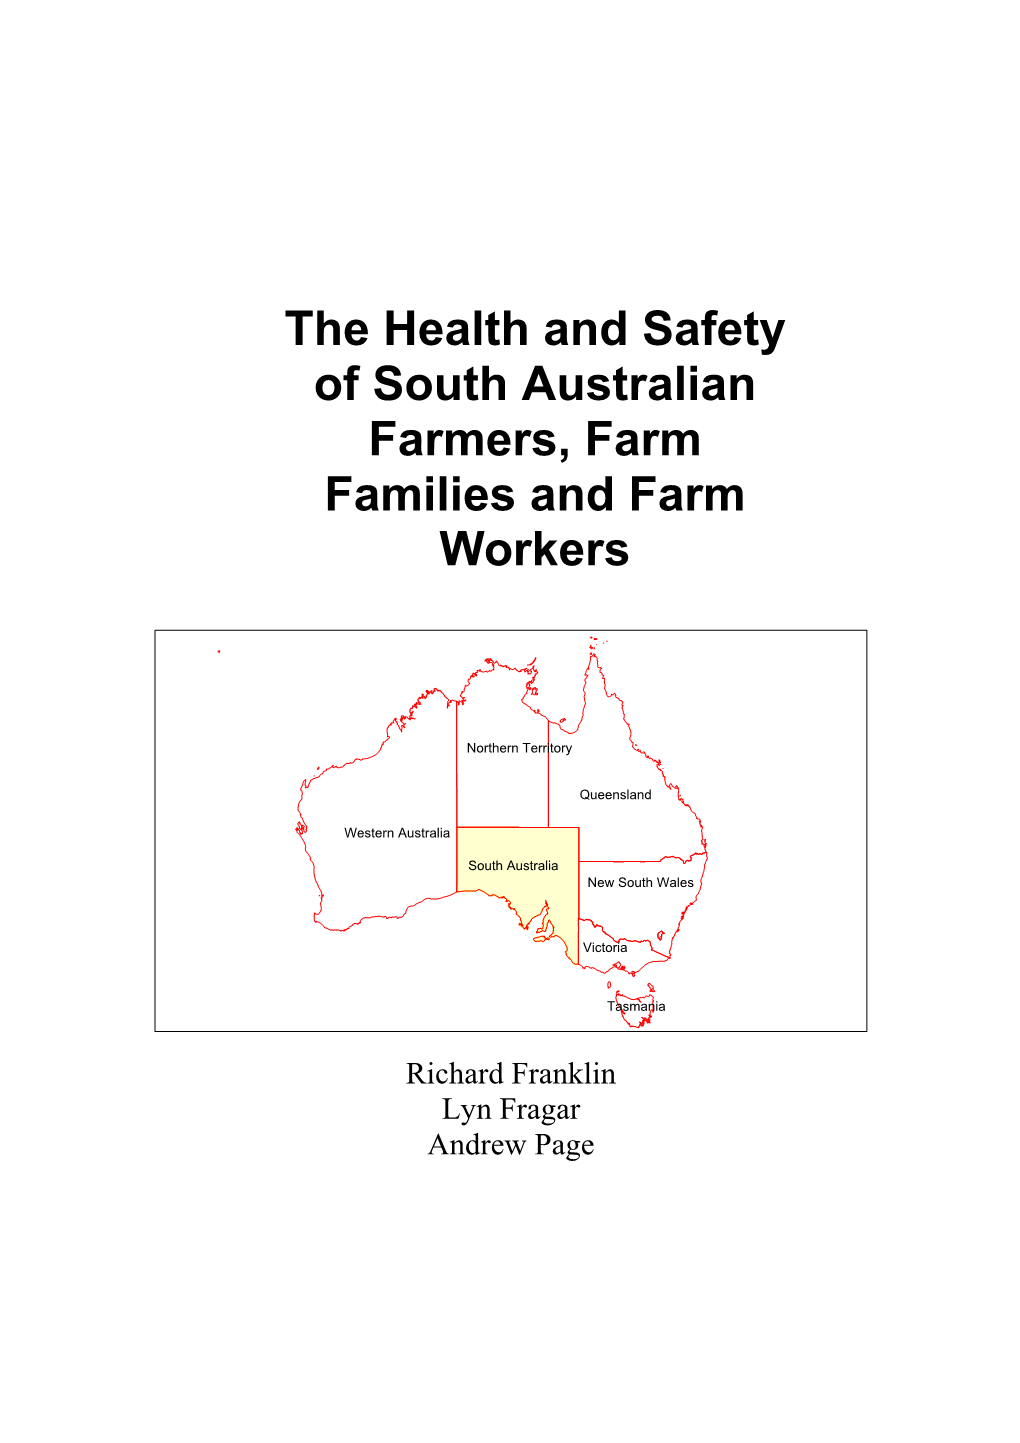 The Health and Safety of South Australian Farmers, Farm Families and Farm Workers